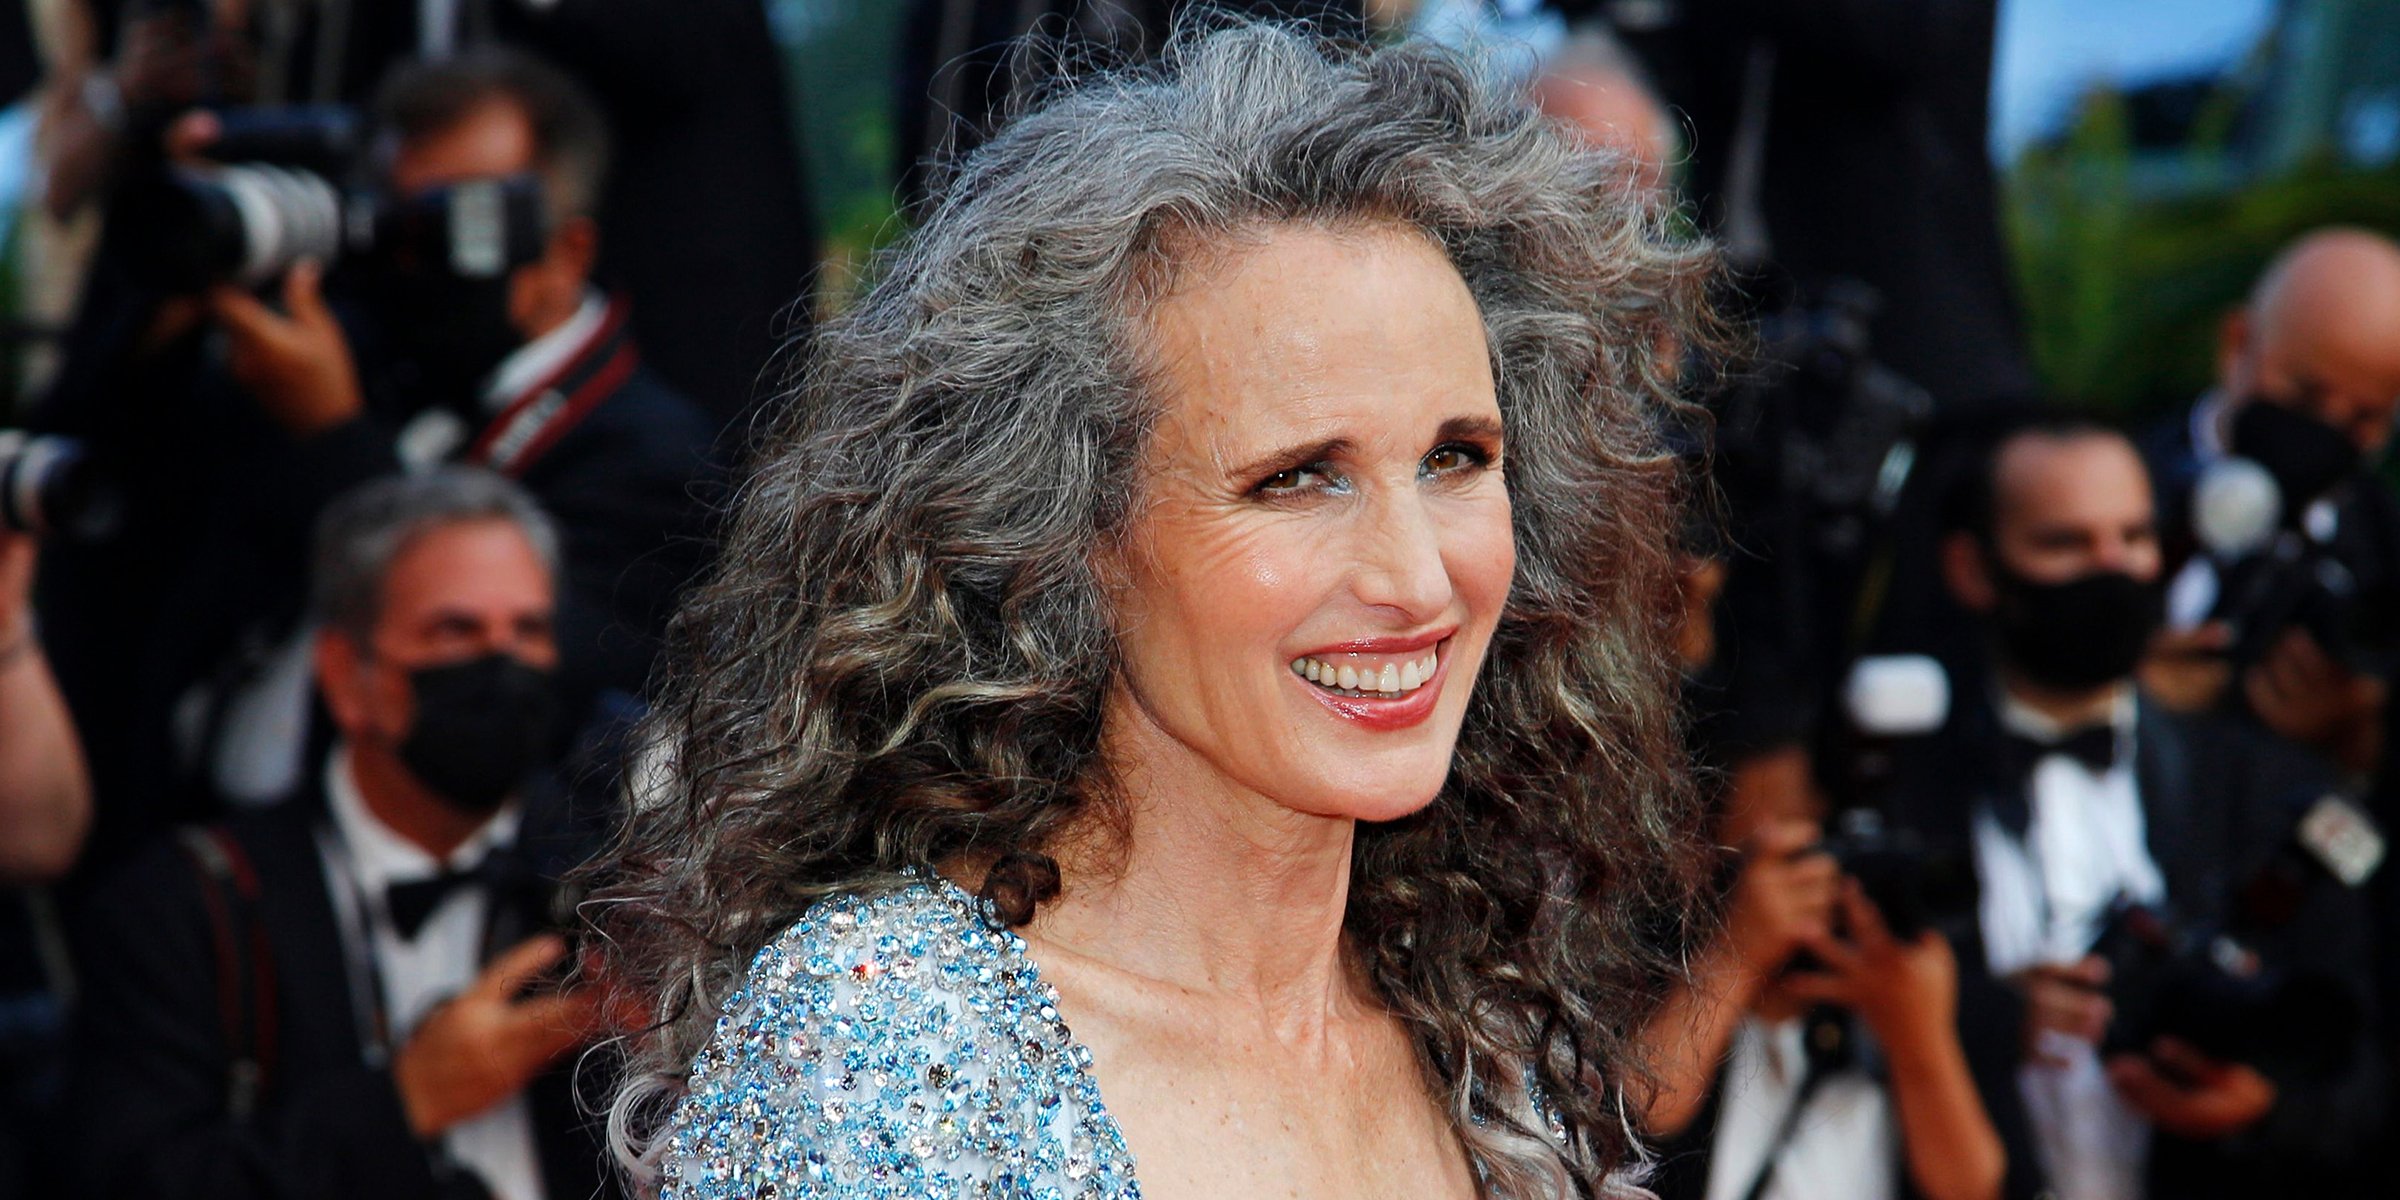 Andie MacDowell, 2021 | Source: Getty Images